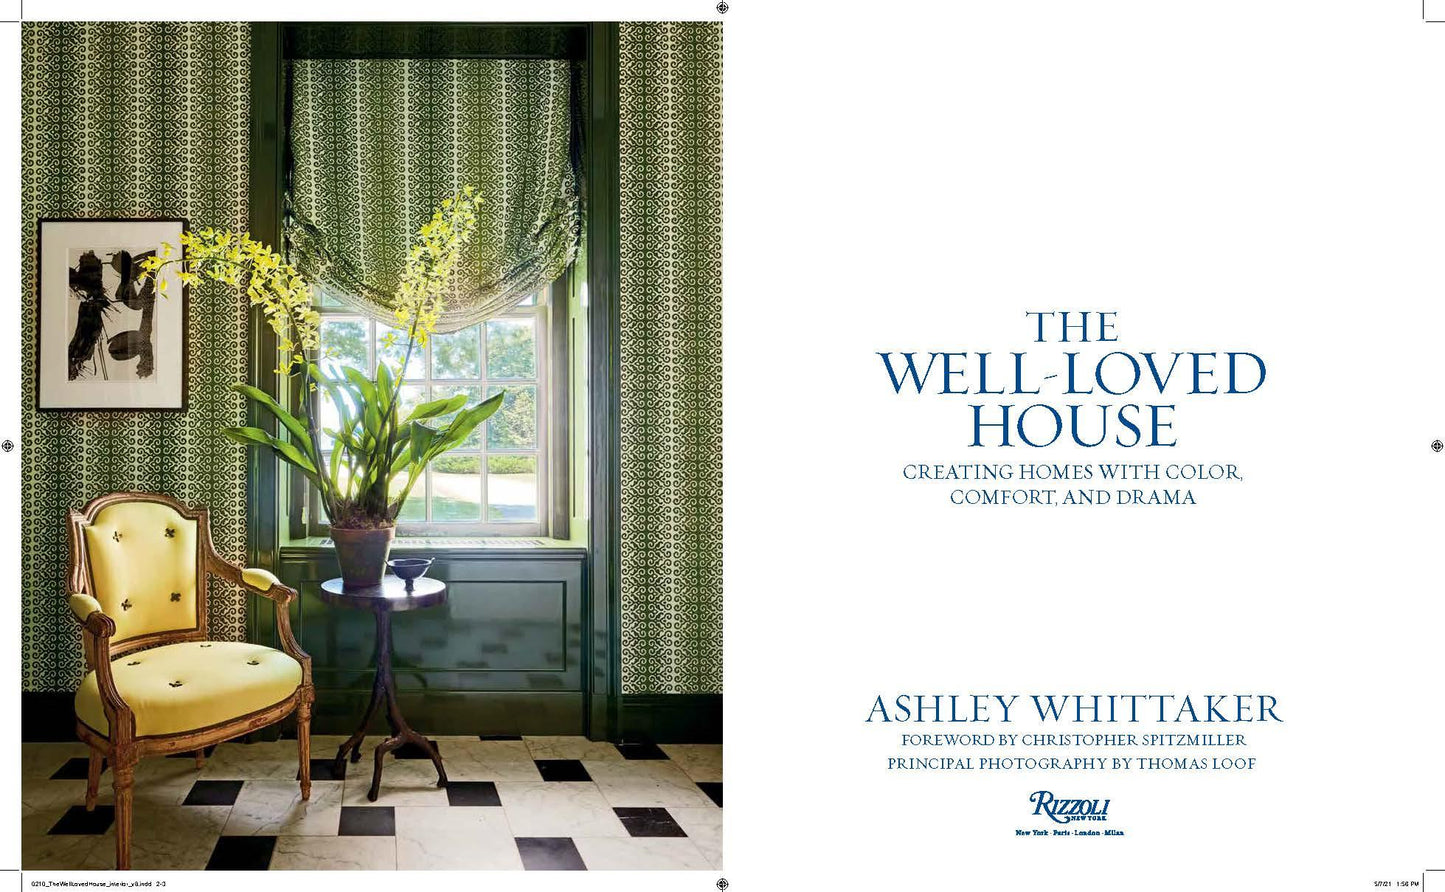 "The Well Loved House" Signed by Ashley Whittaker